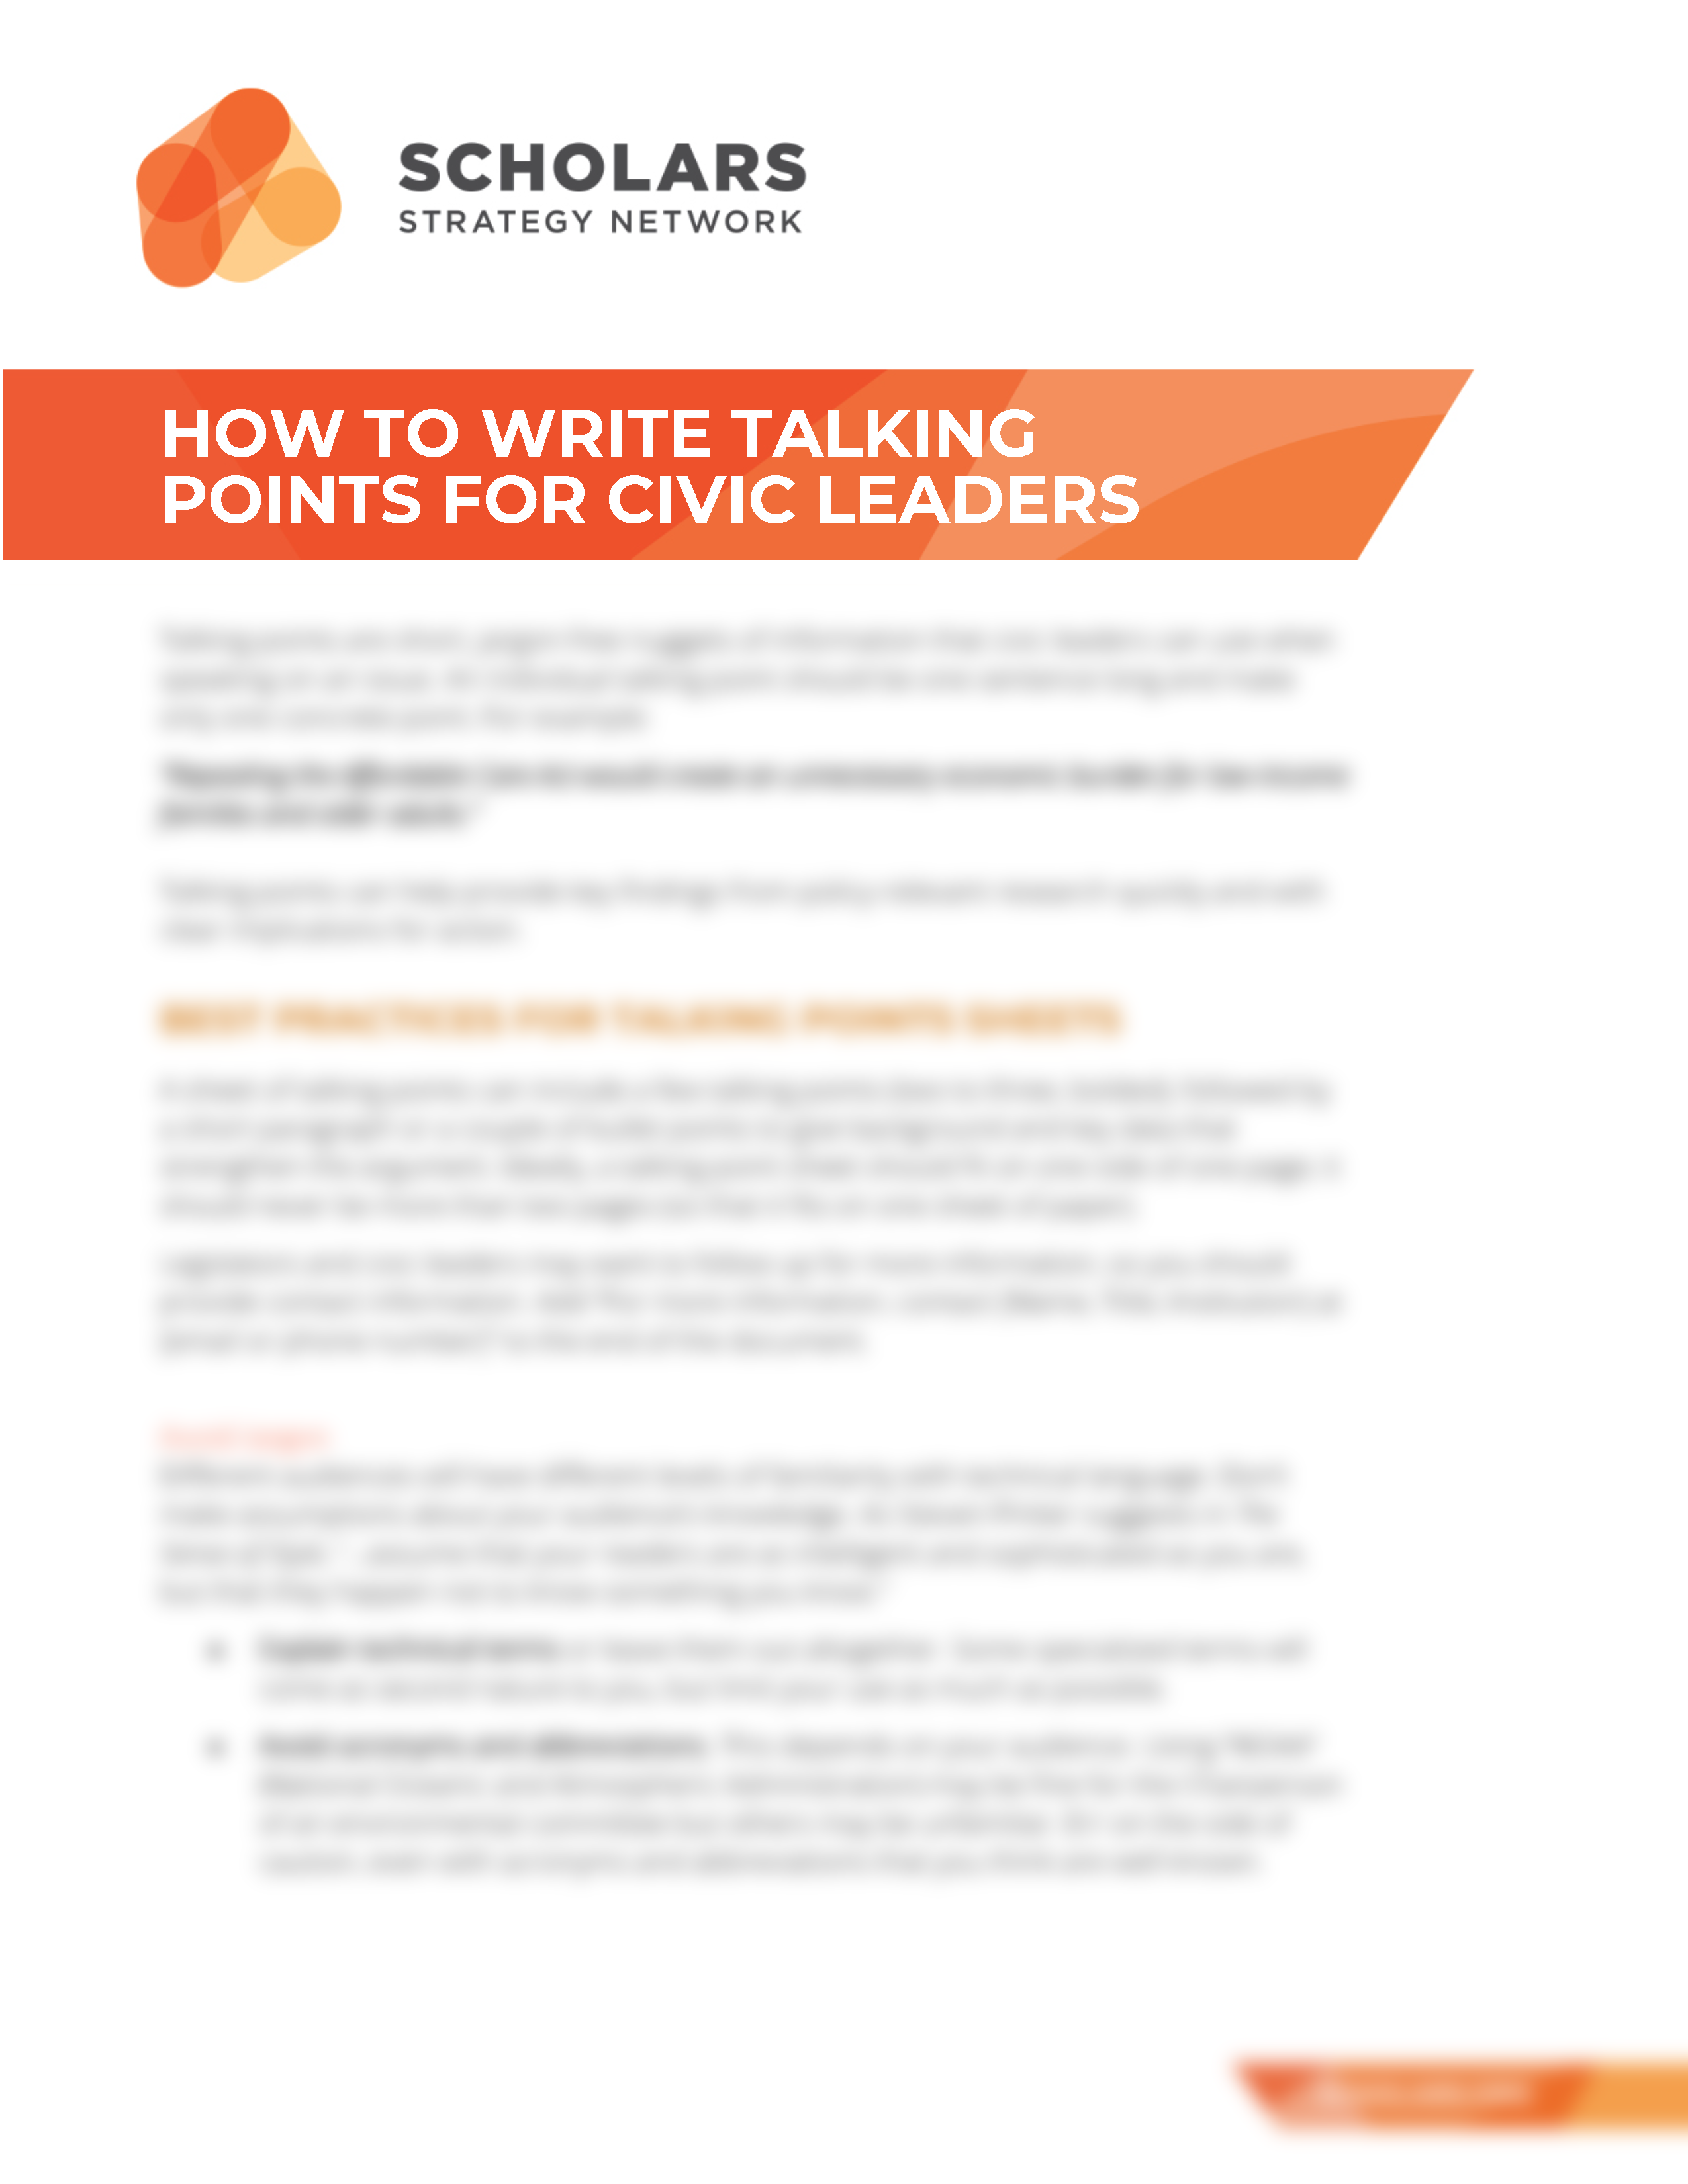 How To: Best Practices for Writing Useful Policy Talking Points